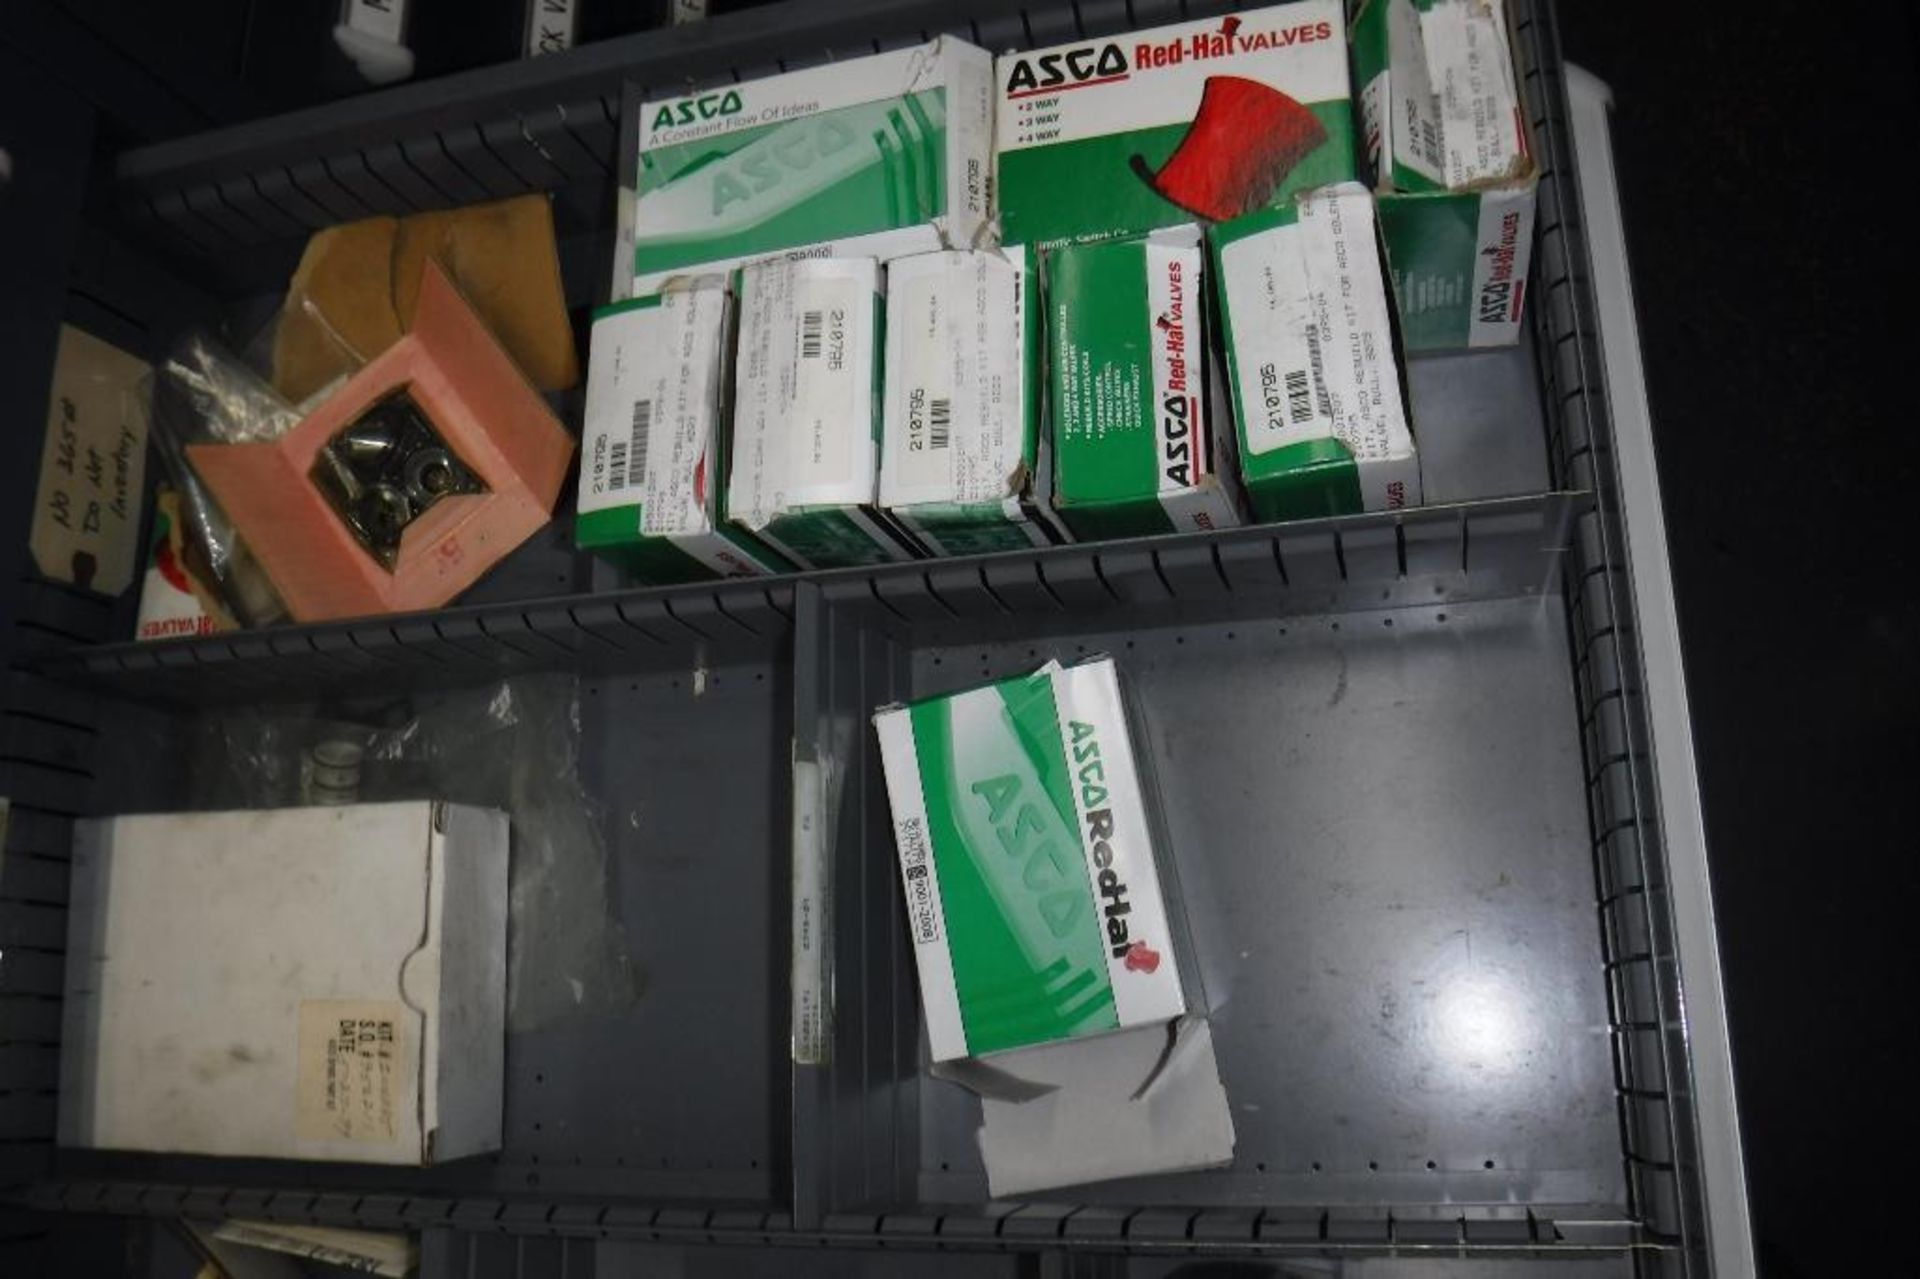 8-Drawer Vidmar Cabinet with Contents-Automatic Valve Corp., ASCO, Ross, Automatic Allenair, Whitelo - Image 6 of 13